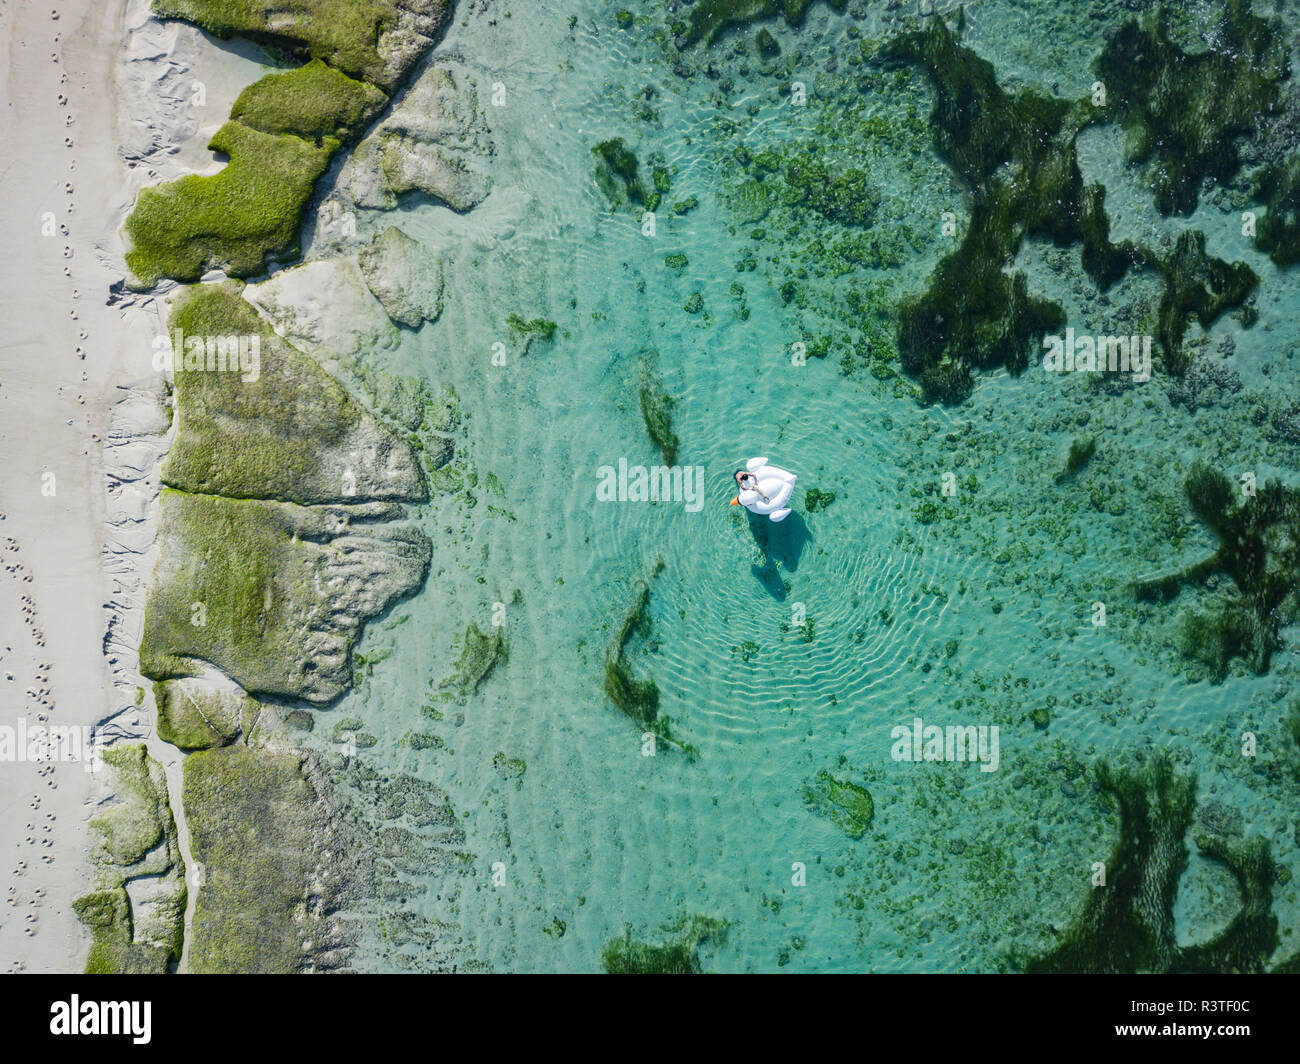 Indonesia, Bali, Aerial view of Karma Kandara beach, one woman, airbed floating on water Stock Photo